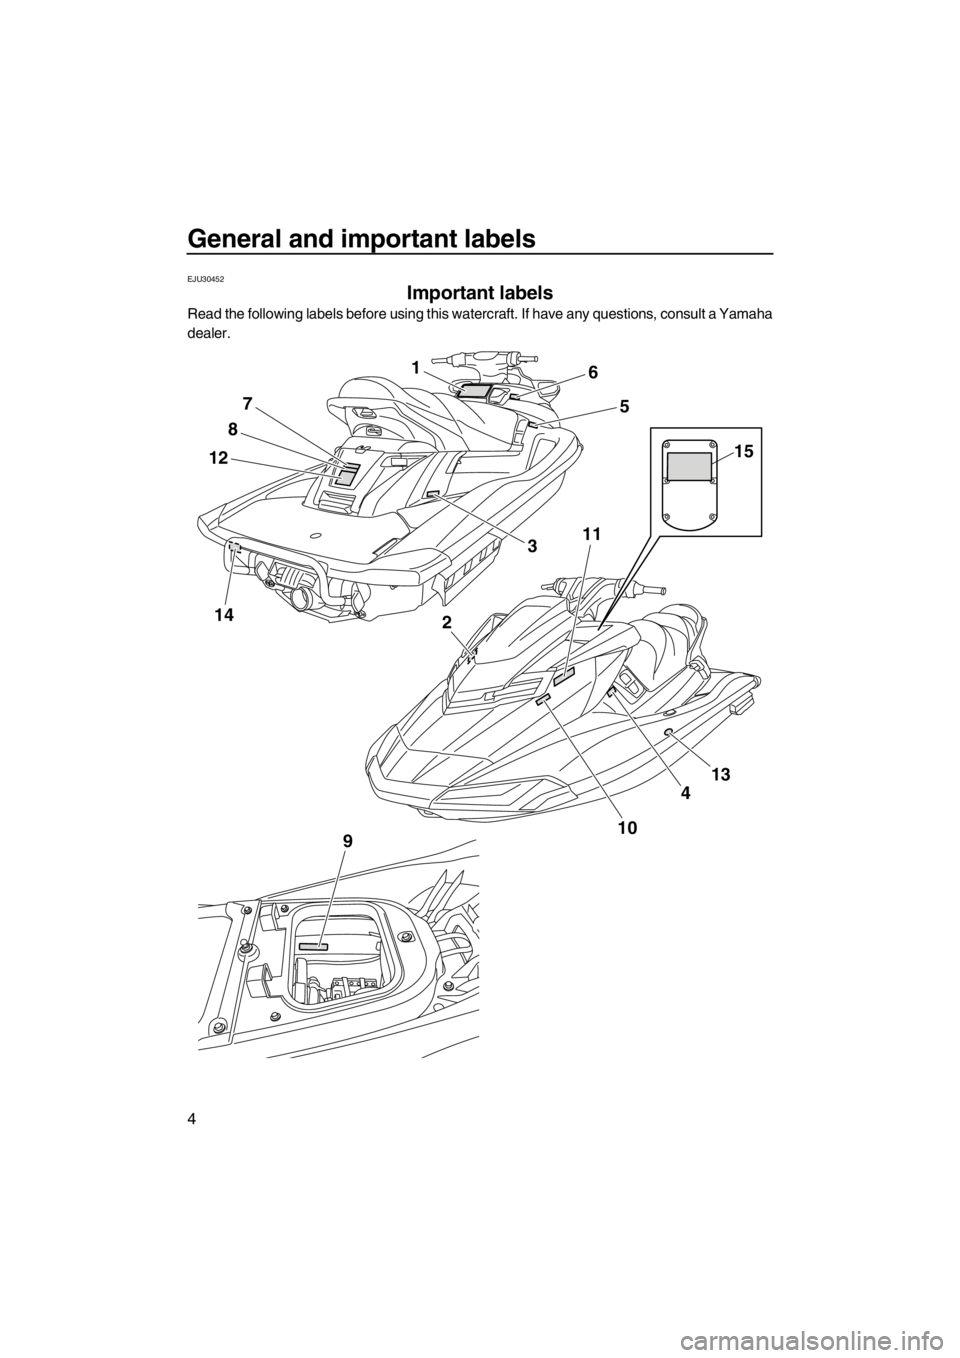 YAMAHA FX HO CRUISER 2012  Owners Manual General and important labels
4
EJU30452
Important labels 
Read the following labels before using this watercraft. If have any questions, consult a Yamaha
dealer.
14
1
12
8
7
11
2
9
4
13
10
6
5
3
15
UF